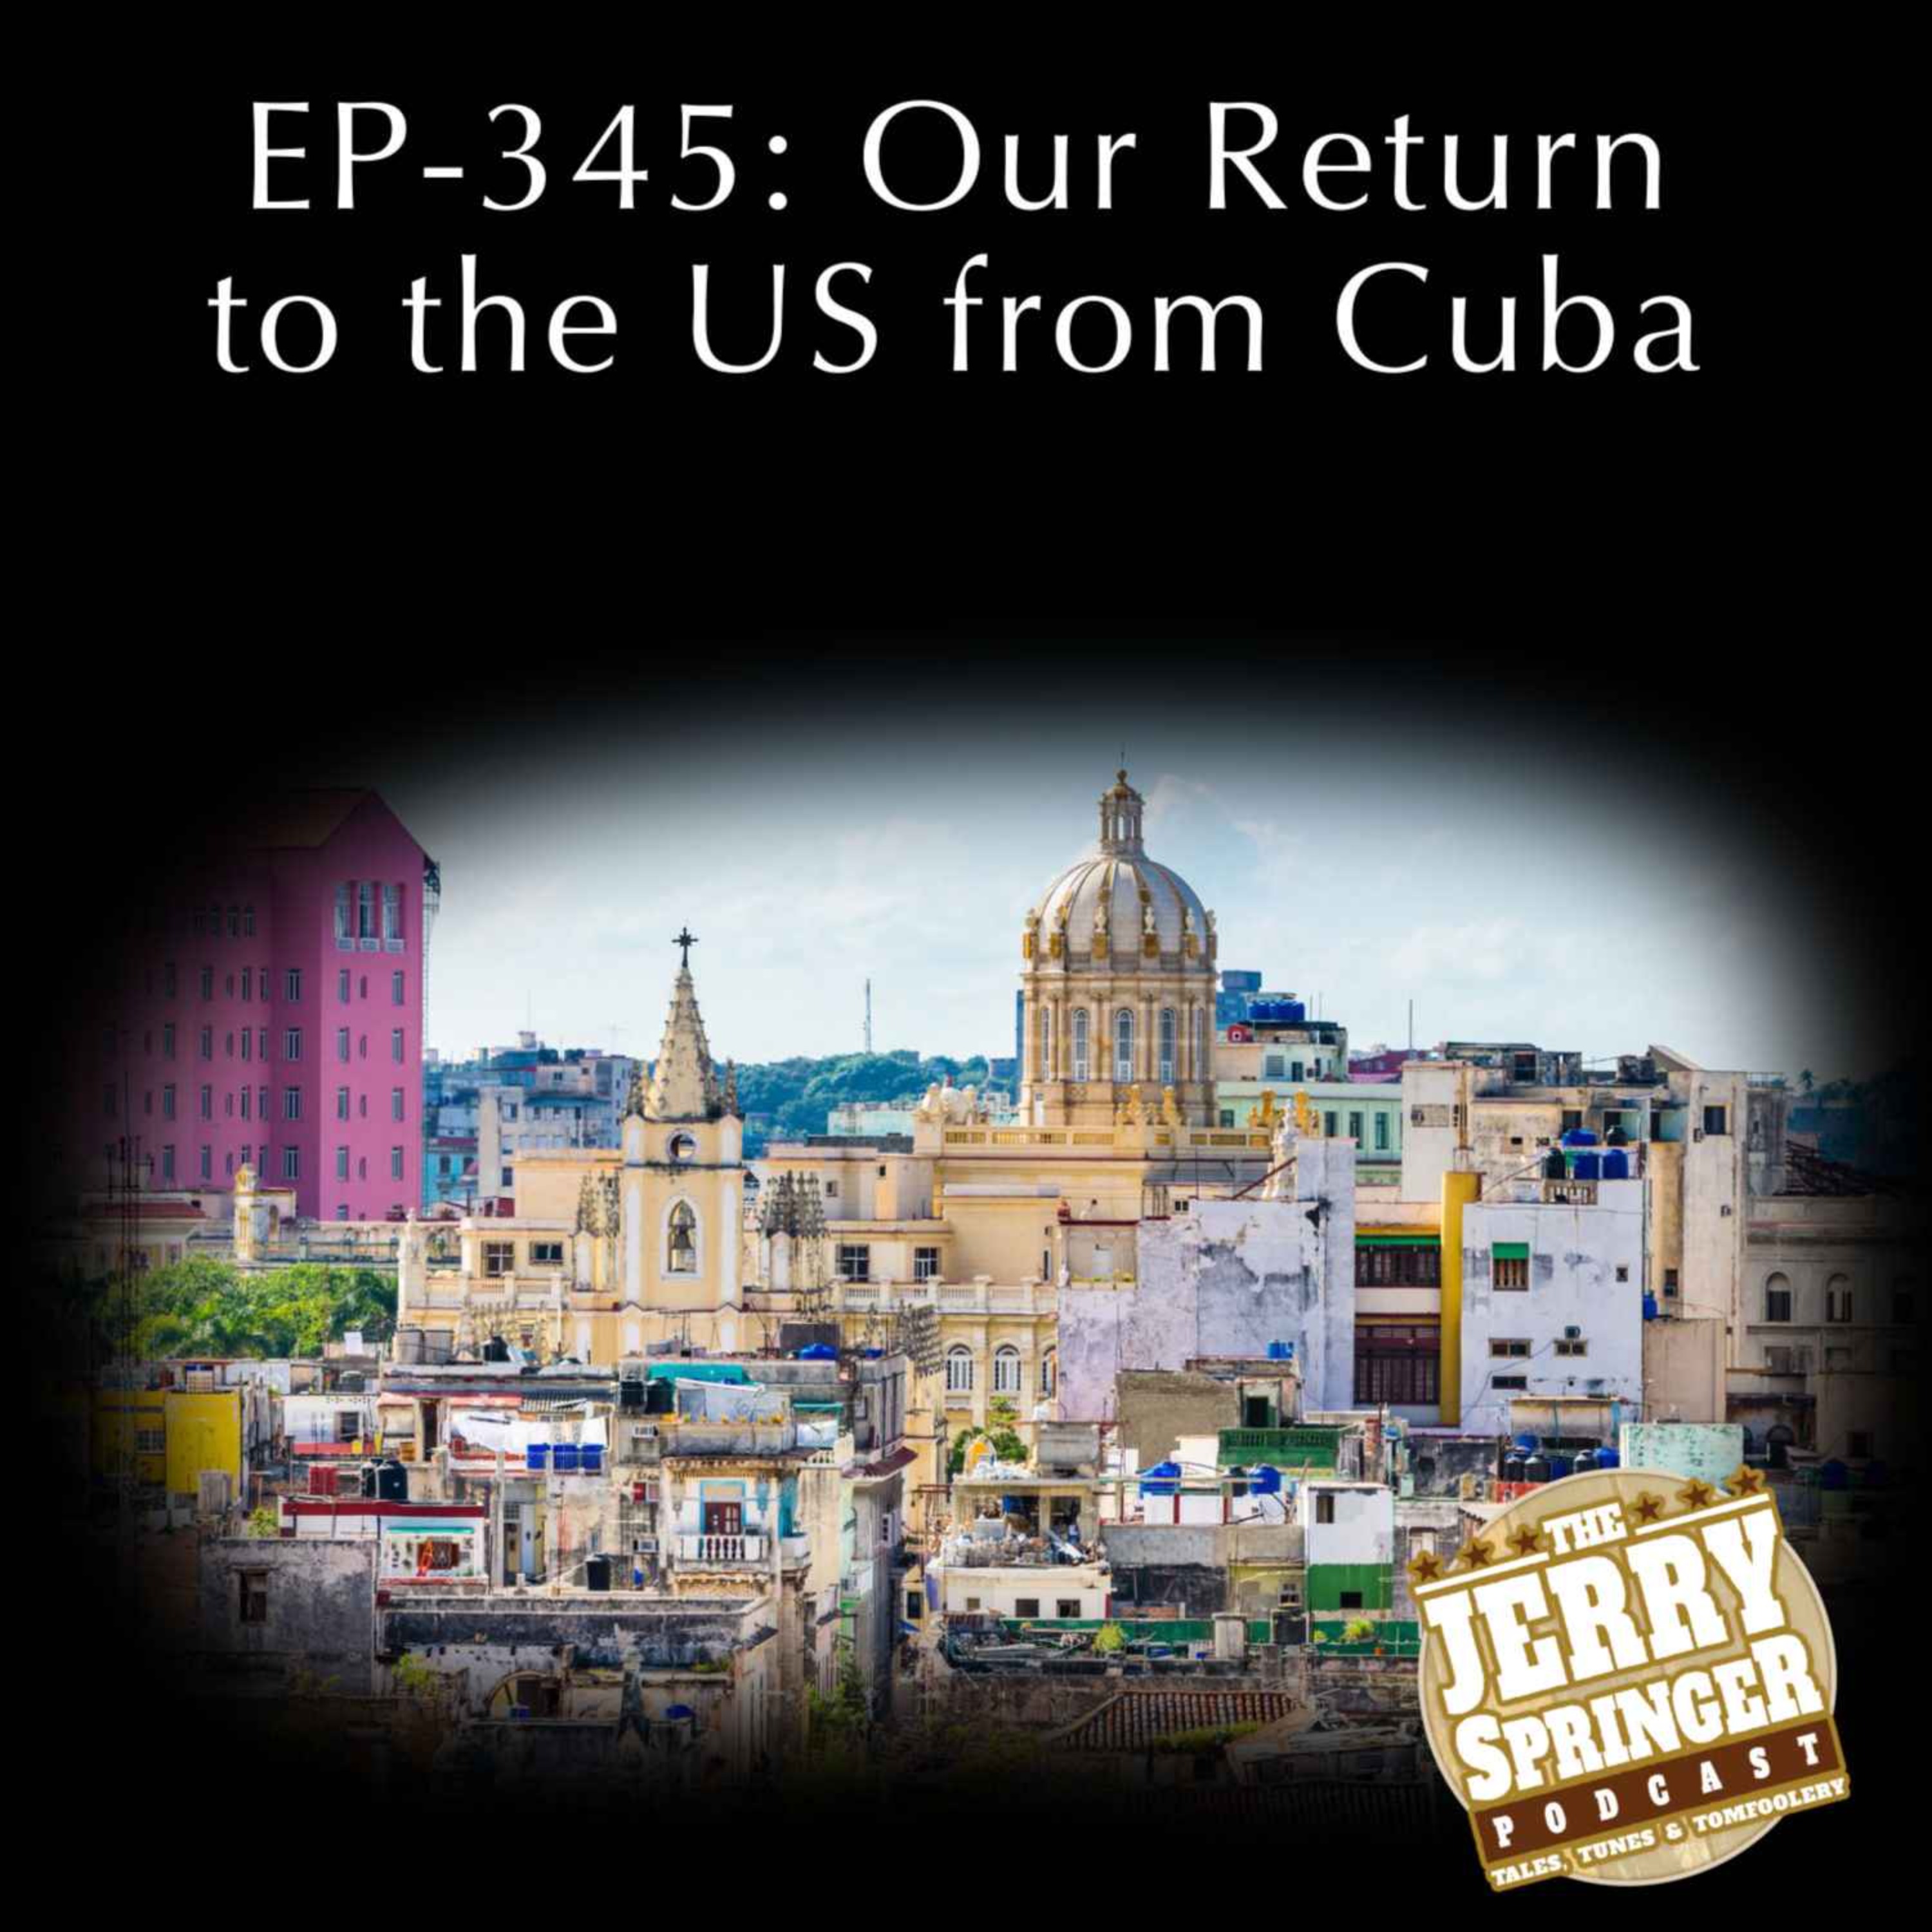 Our Return to the US from Cuba: EP-345